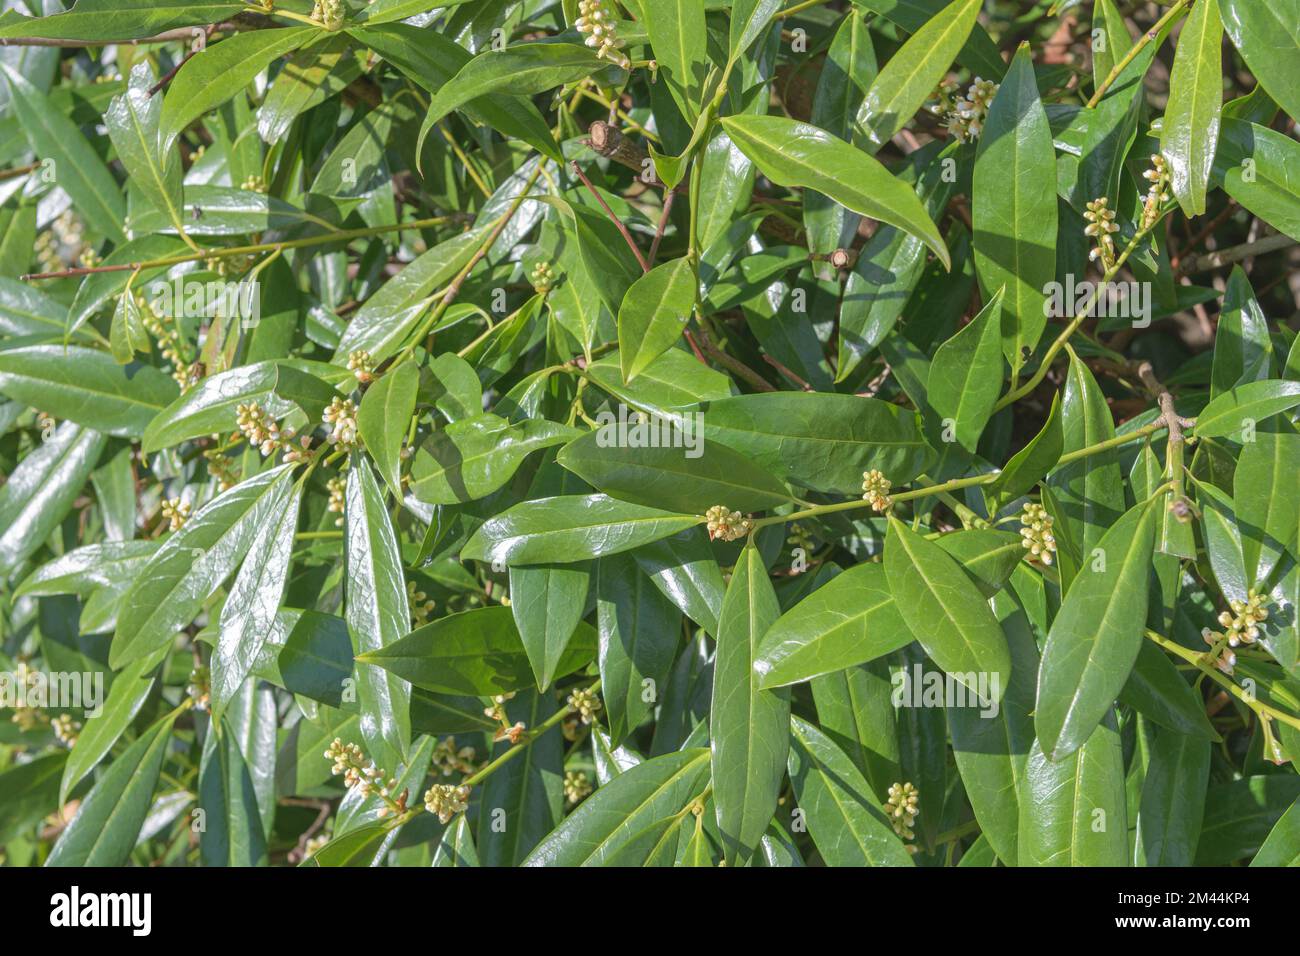 Rhododendron leaves with new spring buds. Close-up. texturally Stock Photo